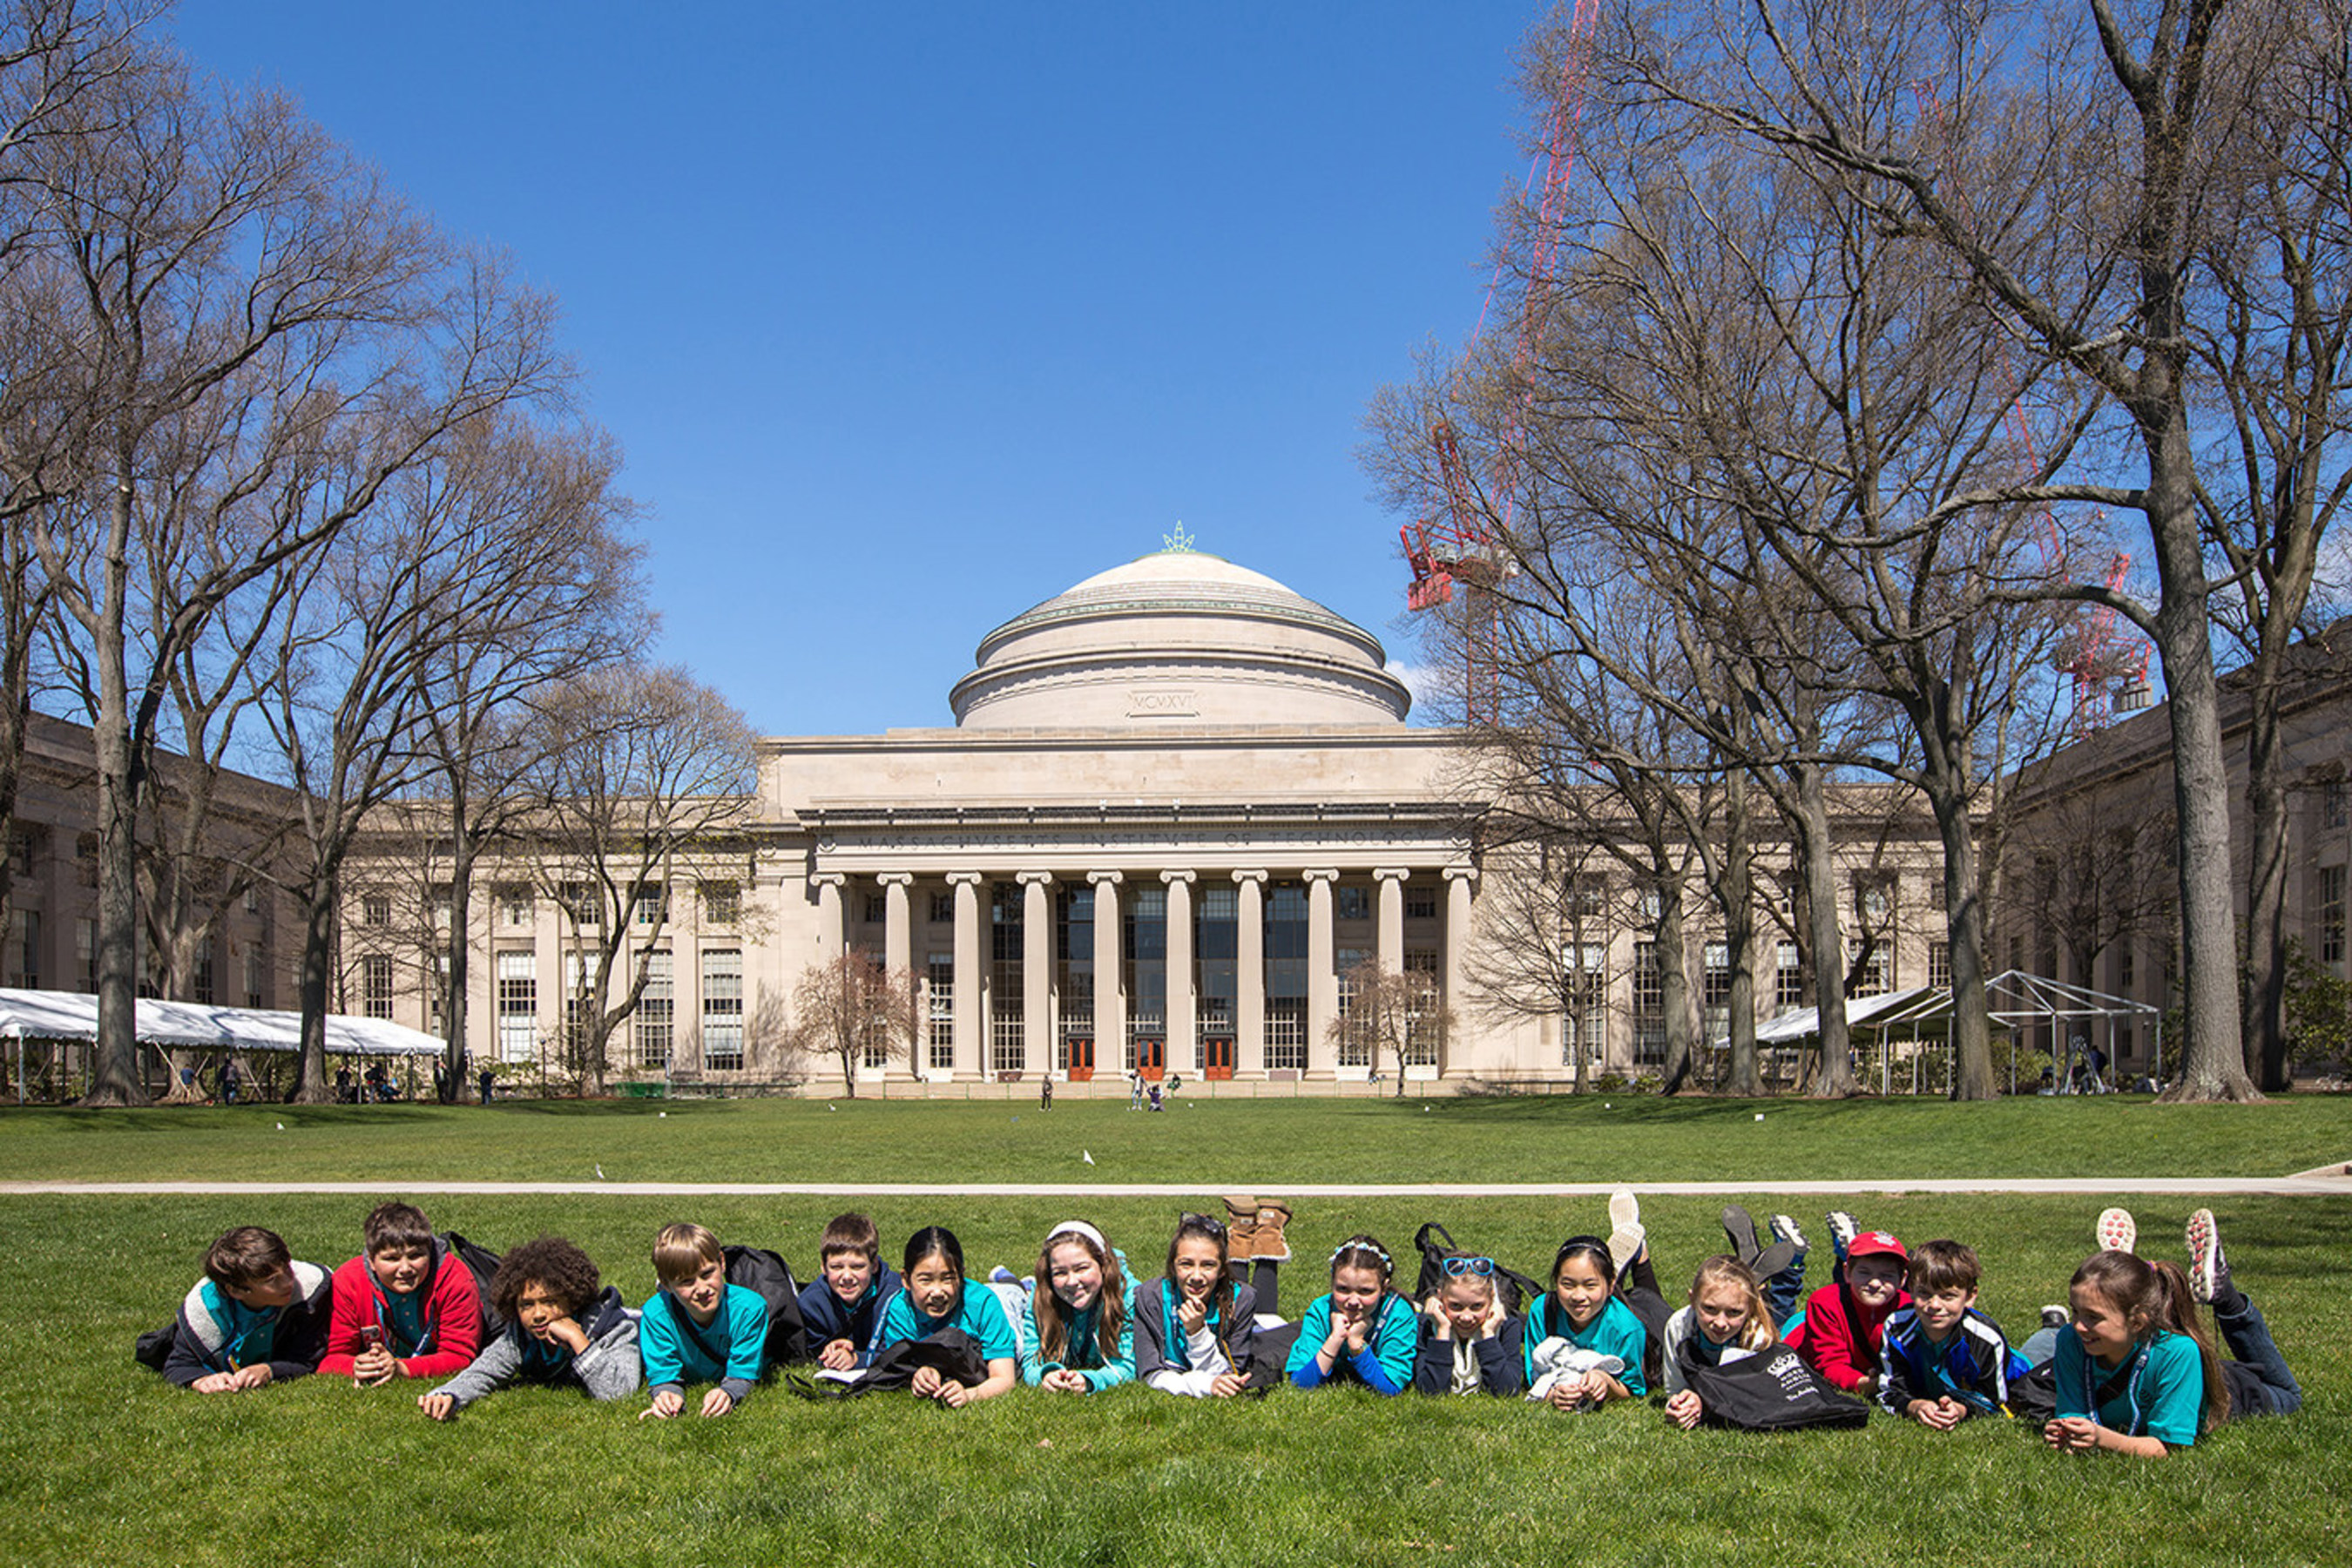 British International School of Chicago, Lincoln Park collaborates with MIT